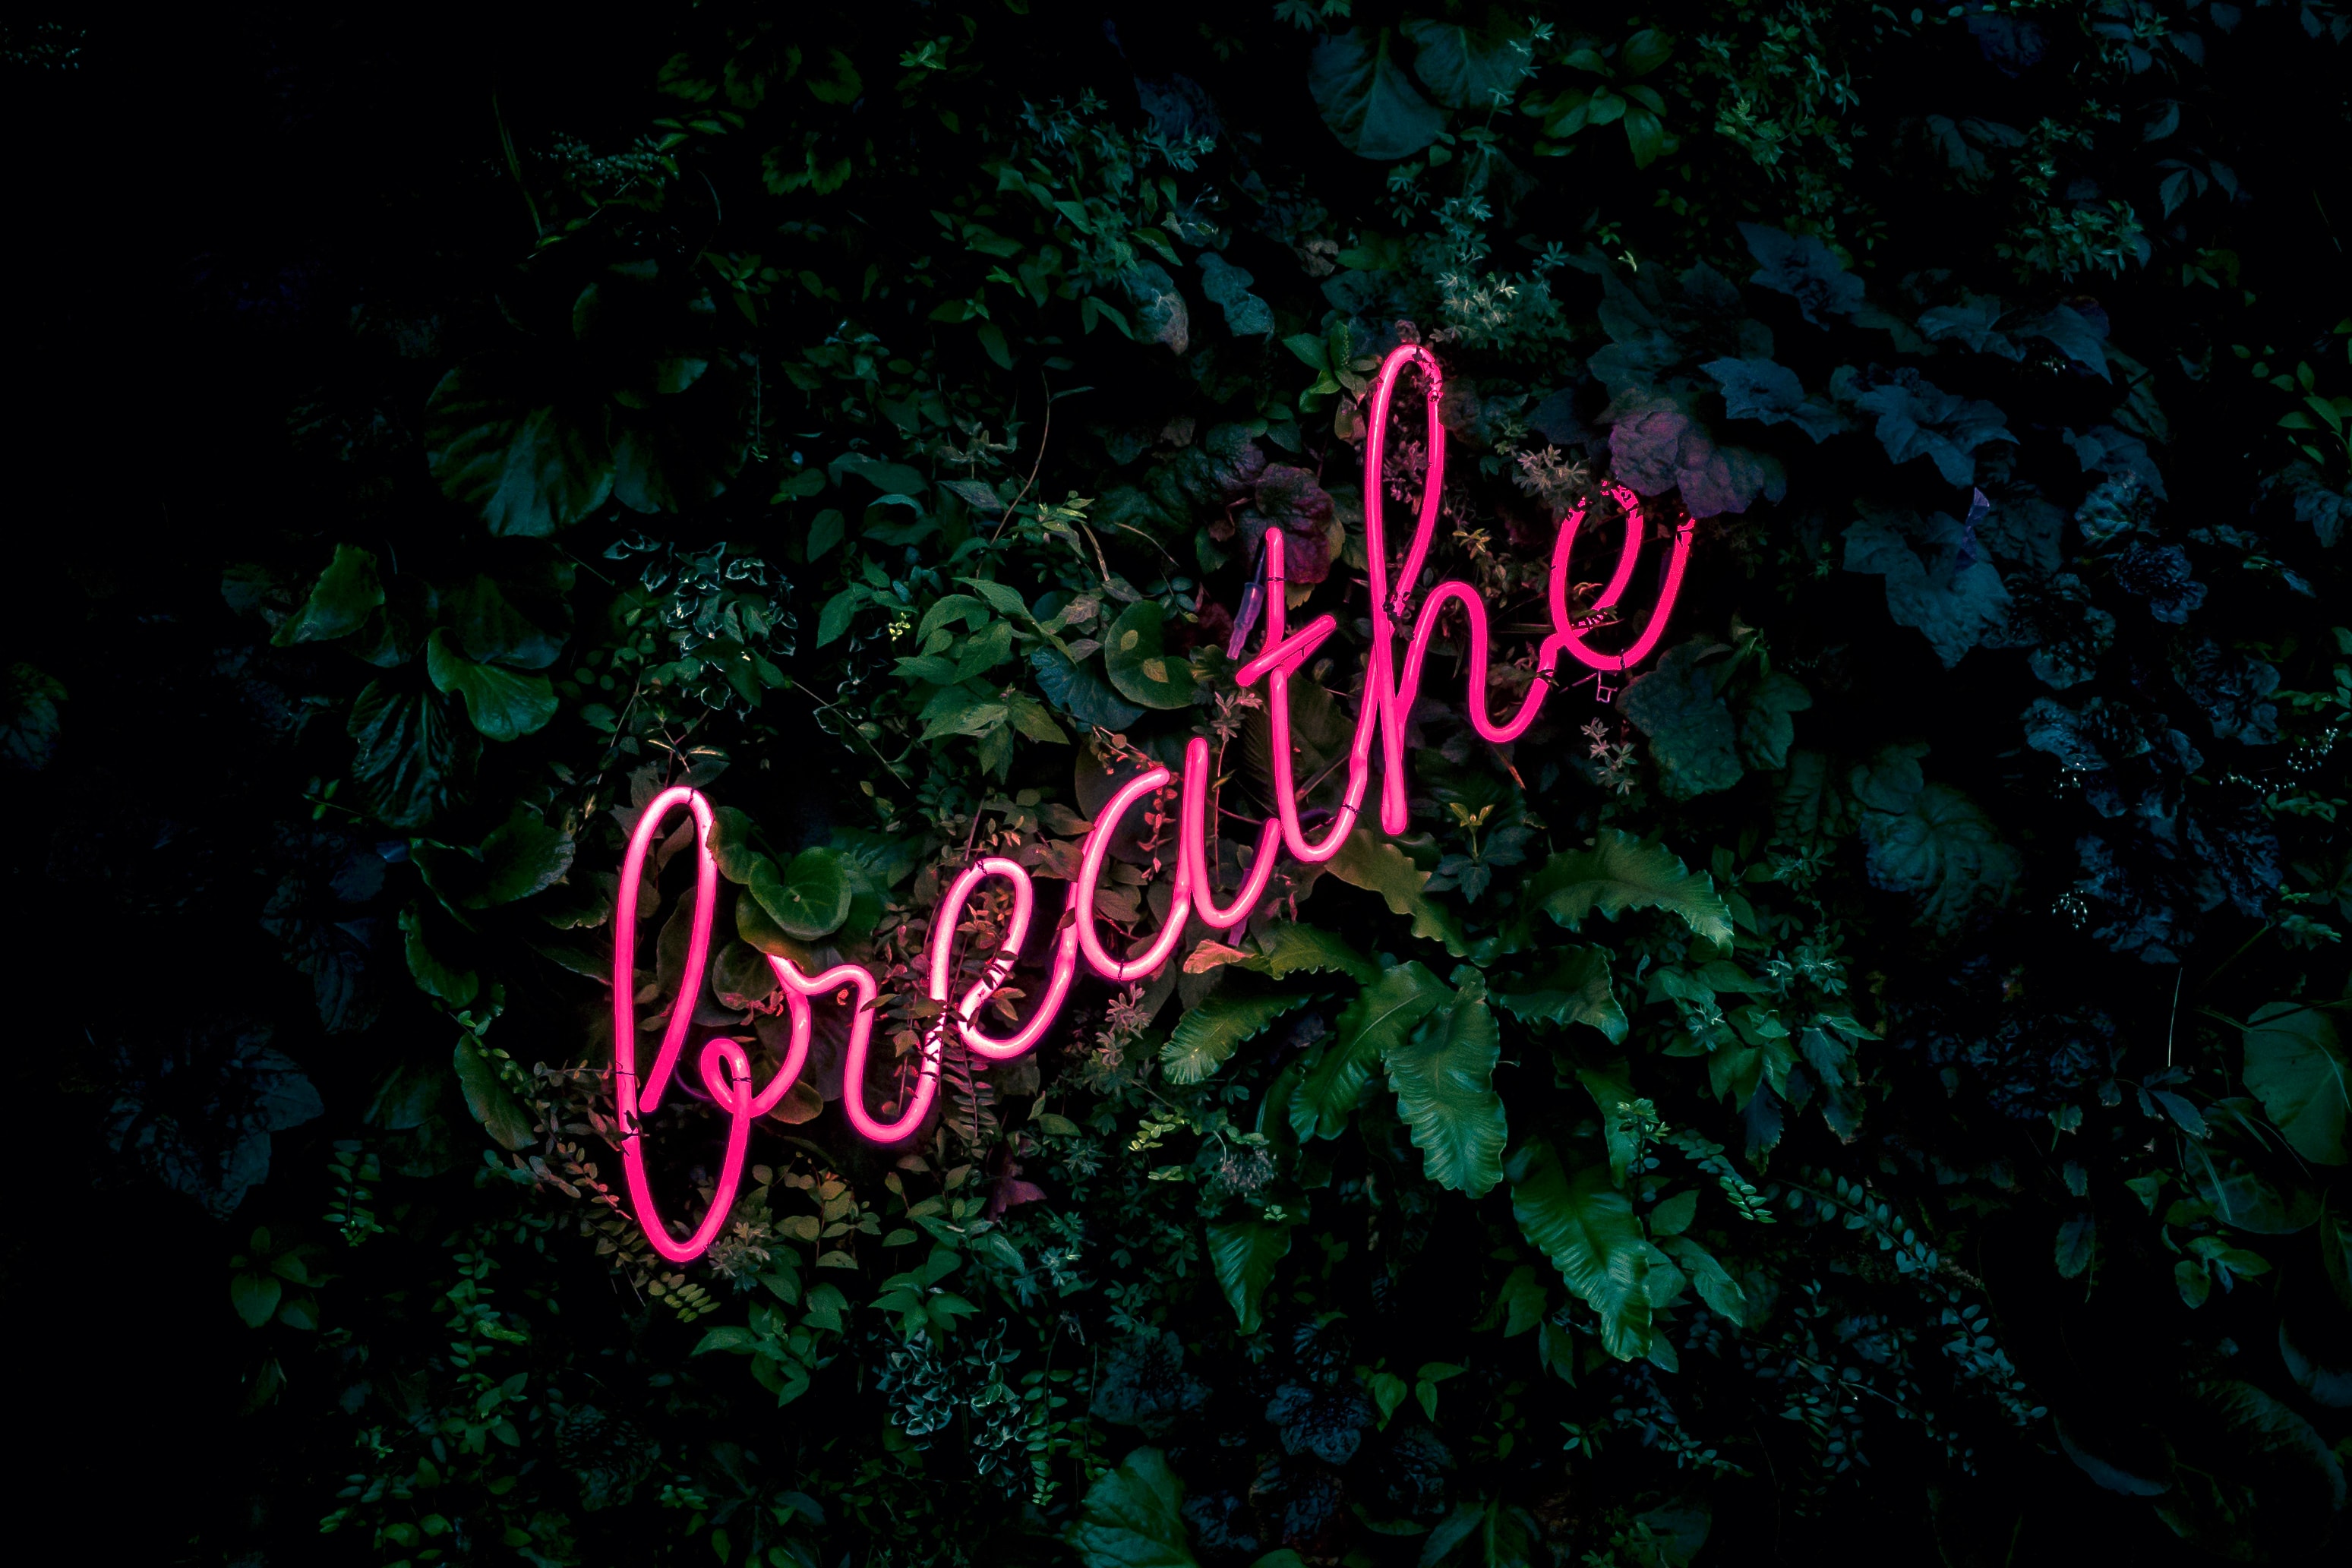 Breathing exercises to quiet anxiety.